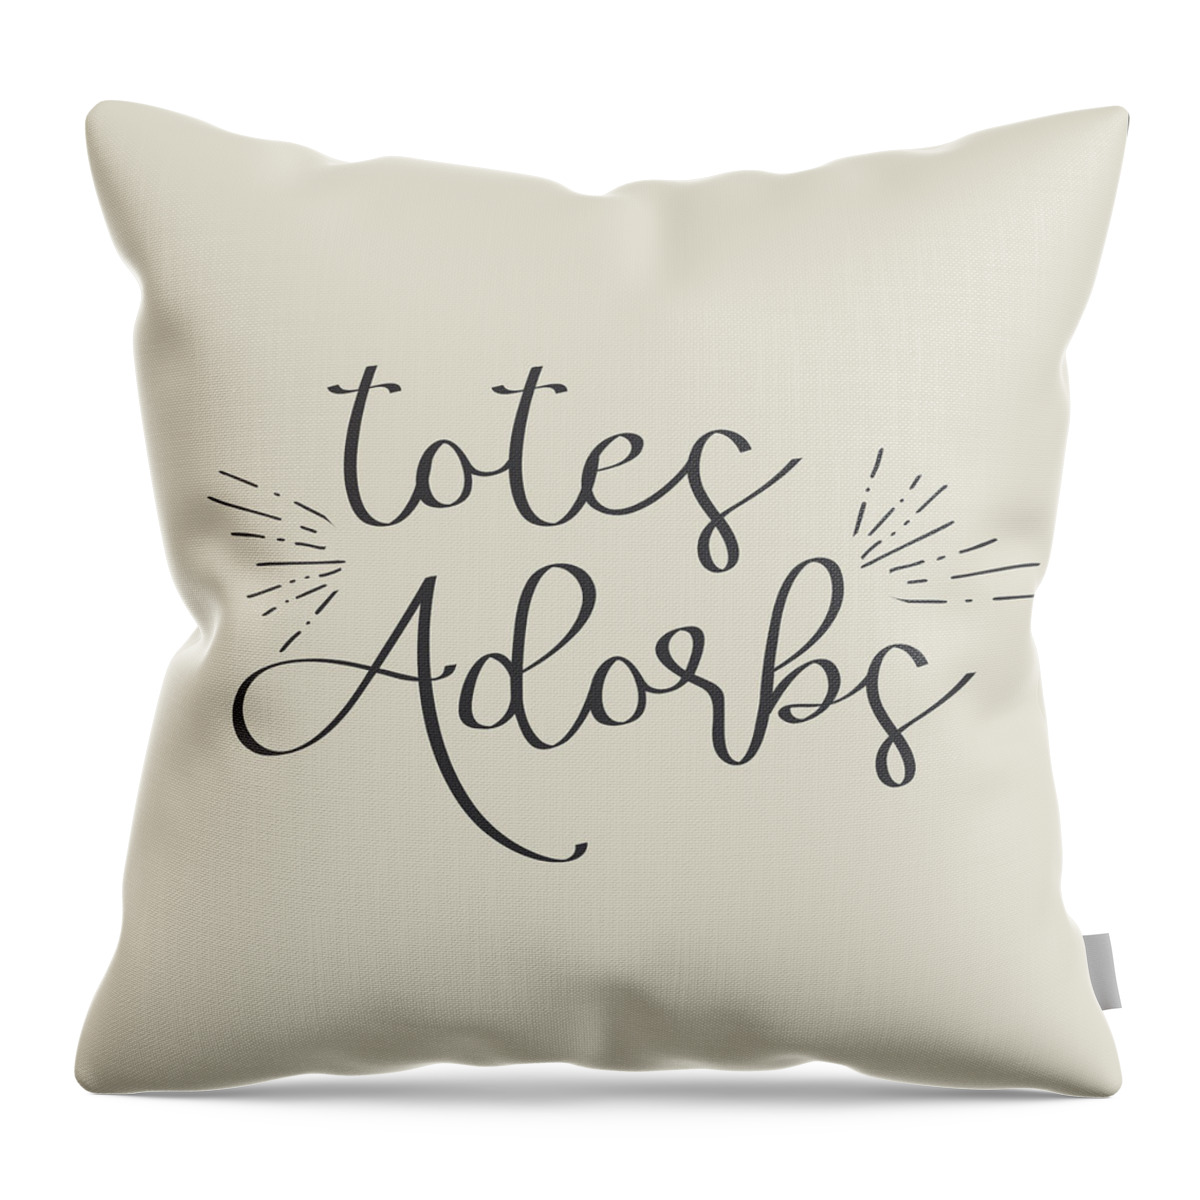 Totes Throw Pillow featuring the digital art Totes Adorbs by Jaime Friedman